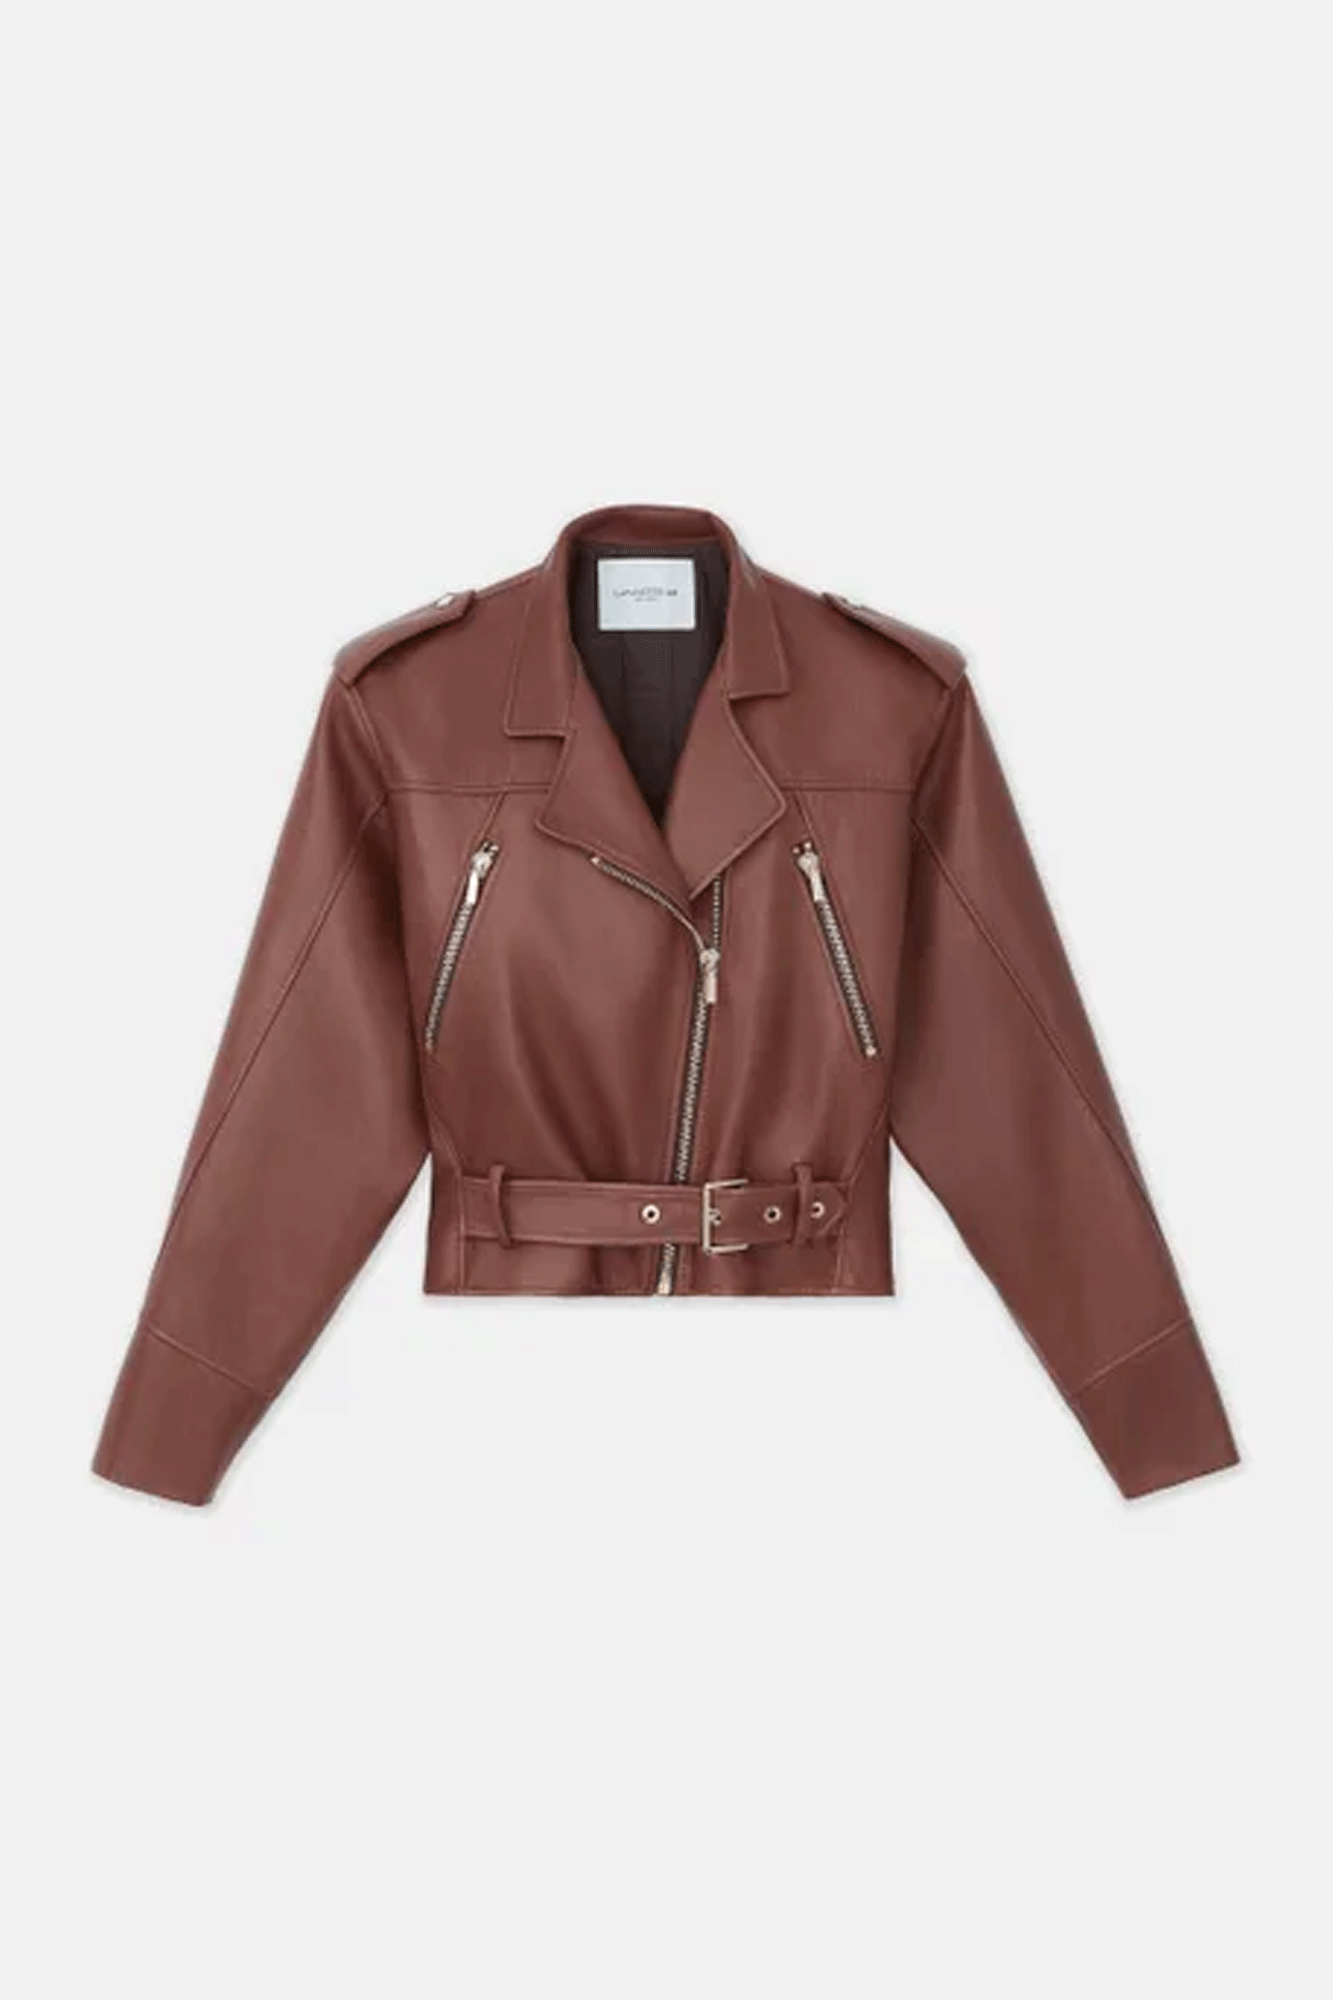 Contemporary styling meets luxe materials with this classic belted moto jacket from Lafayette 148. Expertly crafted in Italian lambskin leather with a quilted interior, it's designed with a high hip cut, a structured stand collar, snap epaulettes, and zip closures.